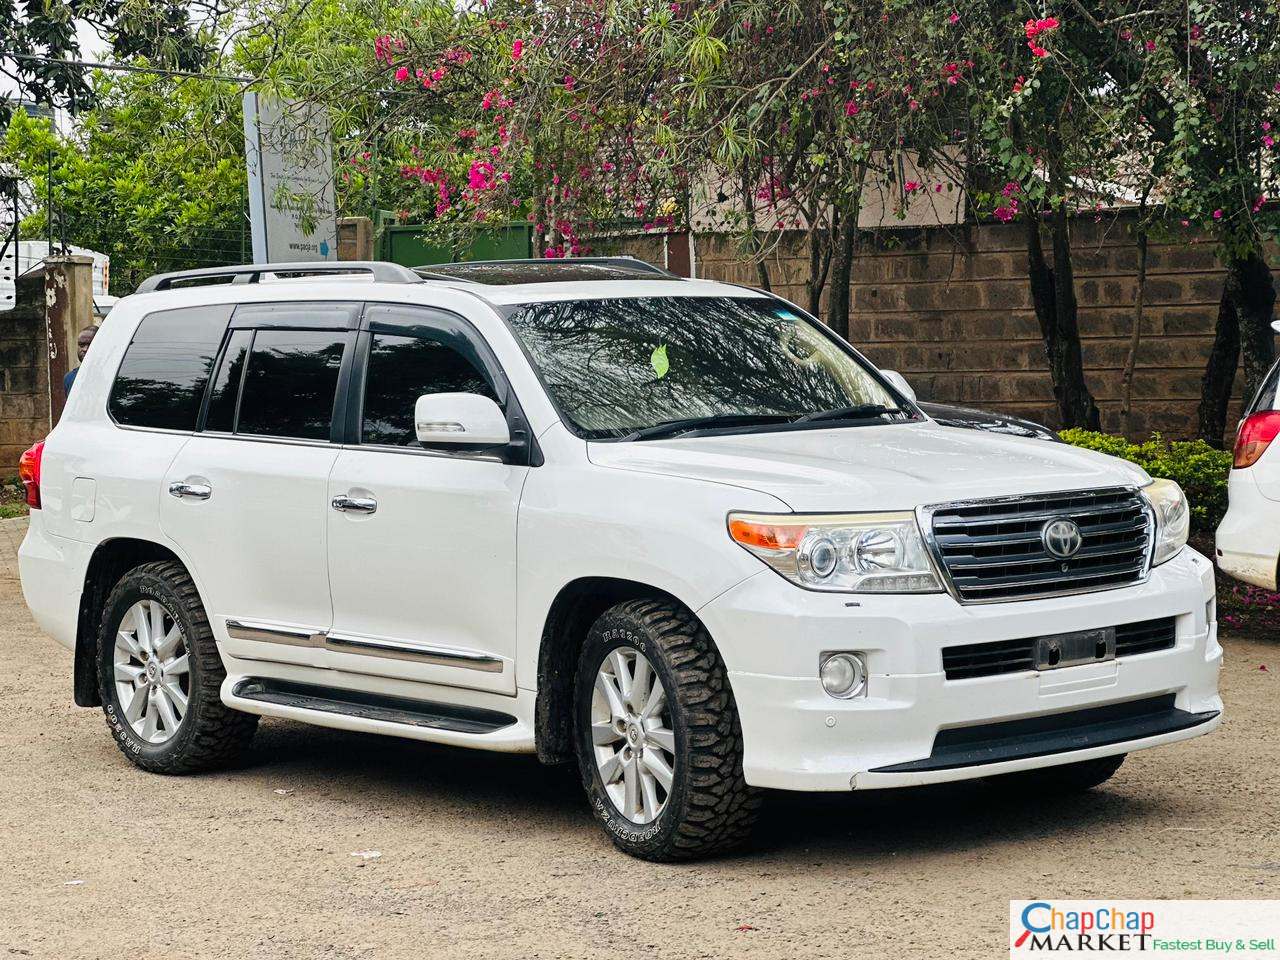 Cars Cars For Sale-Toyota V8 ZX Kenya QUICK SALE SUNROOF LEATHER 2010 4M ONLY You Pay 40% Deposit Trade in OK EXCLUSIVE Toyota v8 for sale in kenya hire purchase installments landcruiser land cruiser